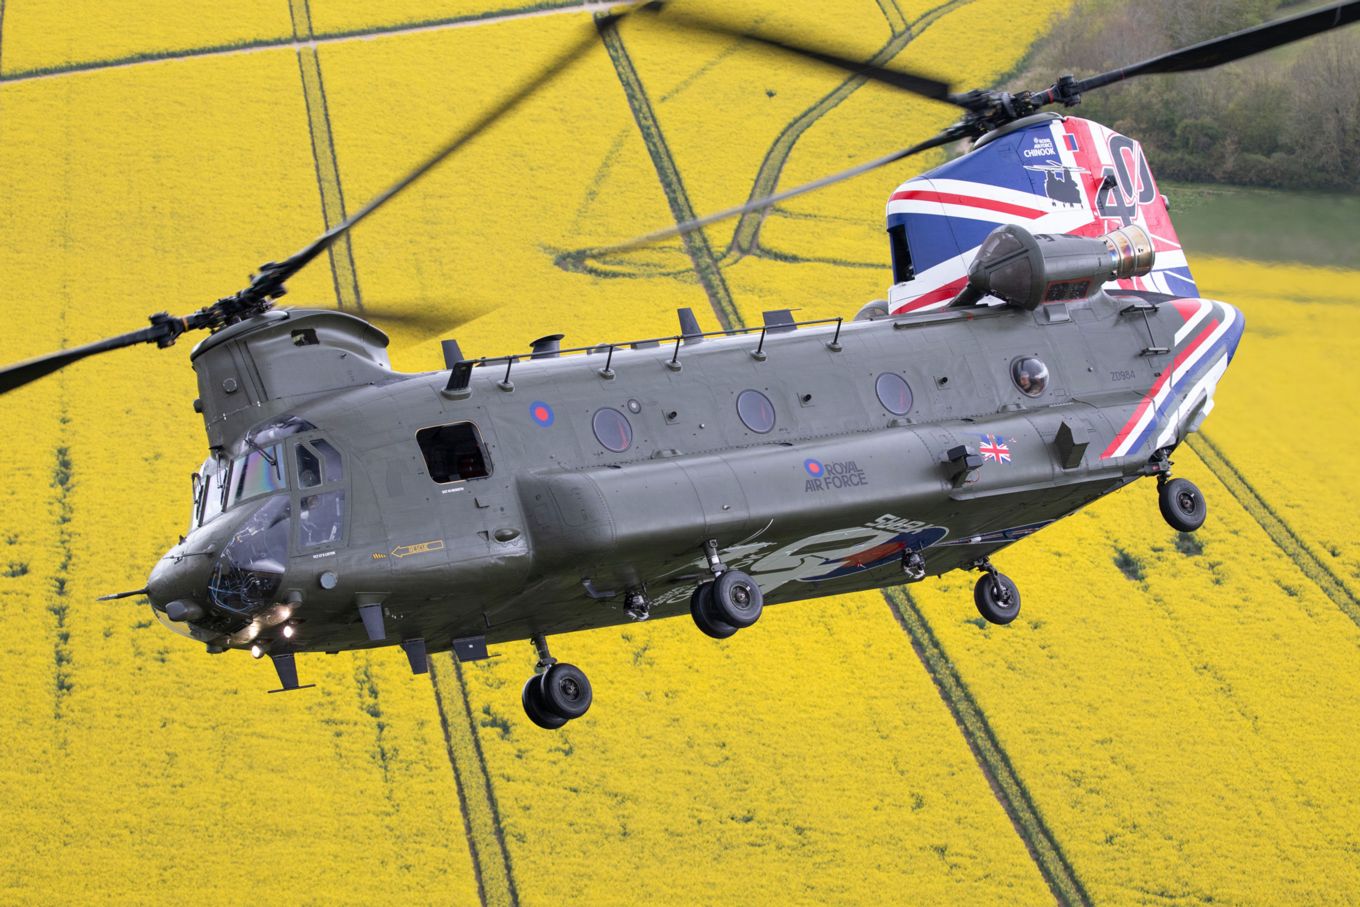 Image shows RAF Chinook with new tail artwork.